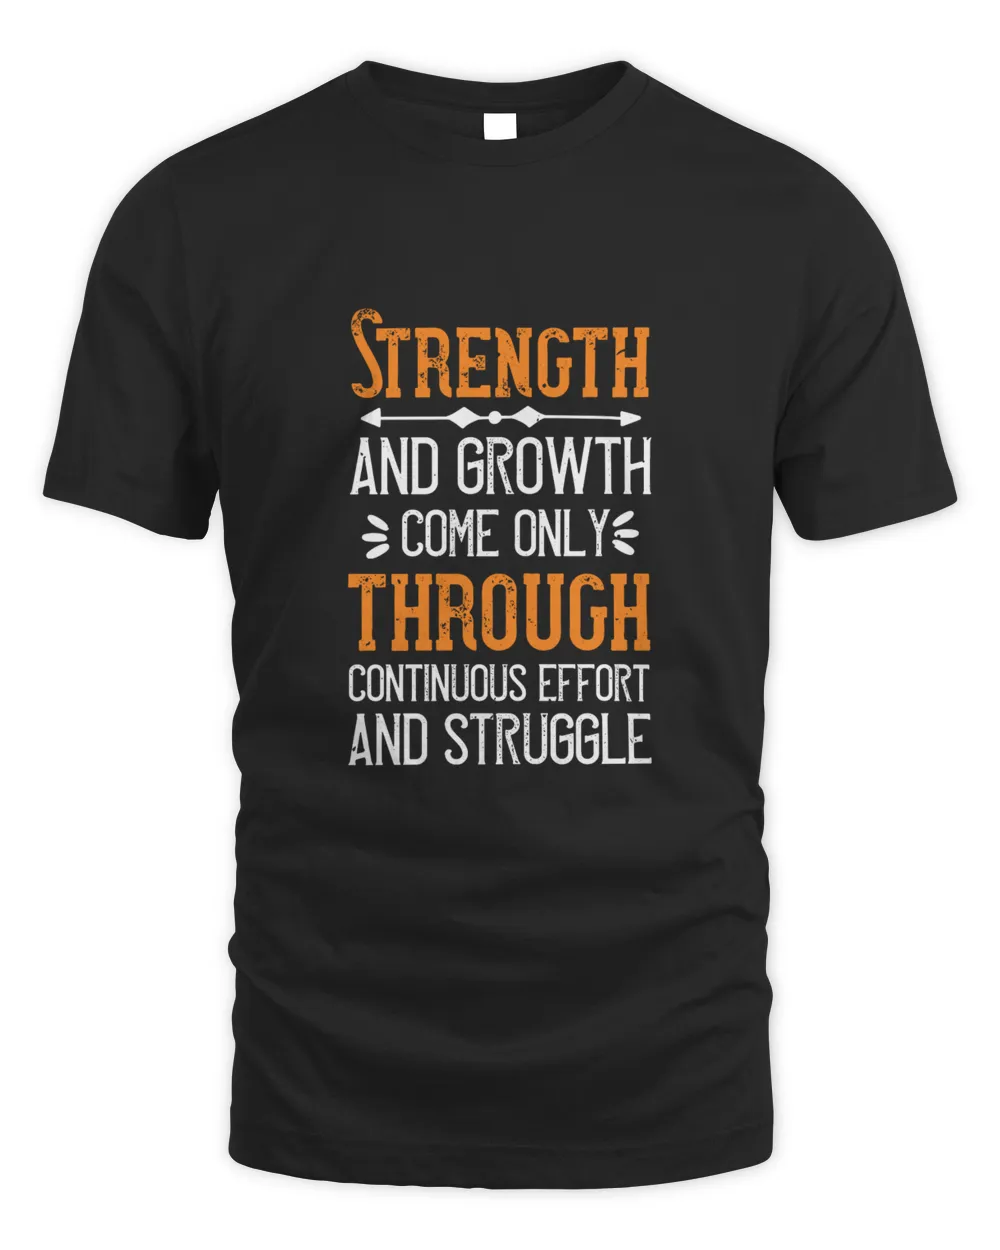 Strength and growth come only through continuous effort and struggle-01